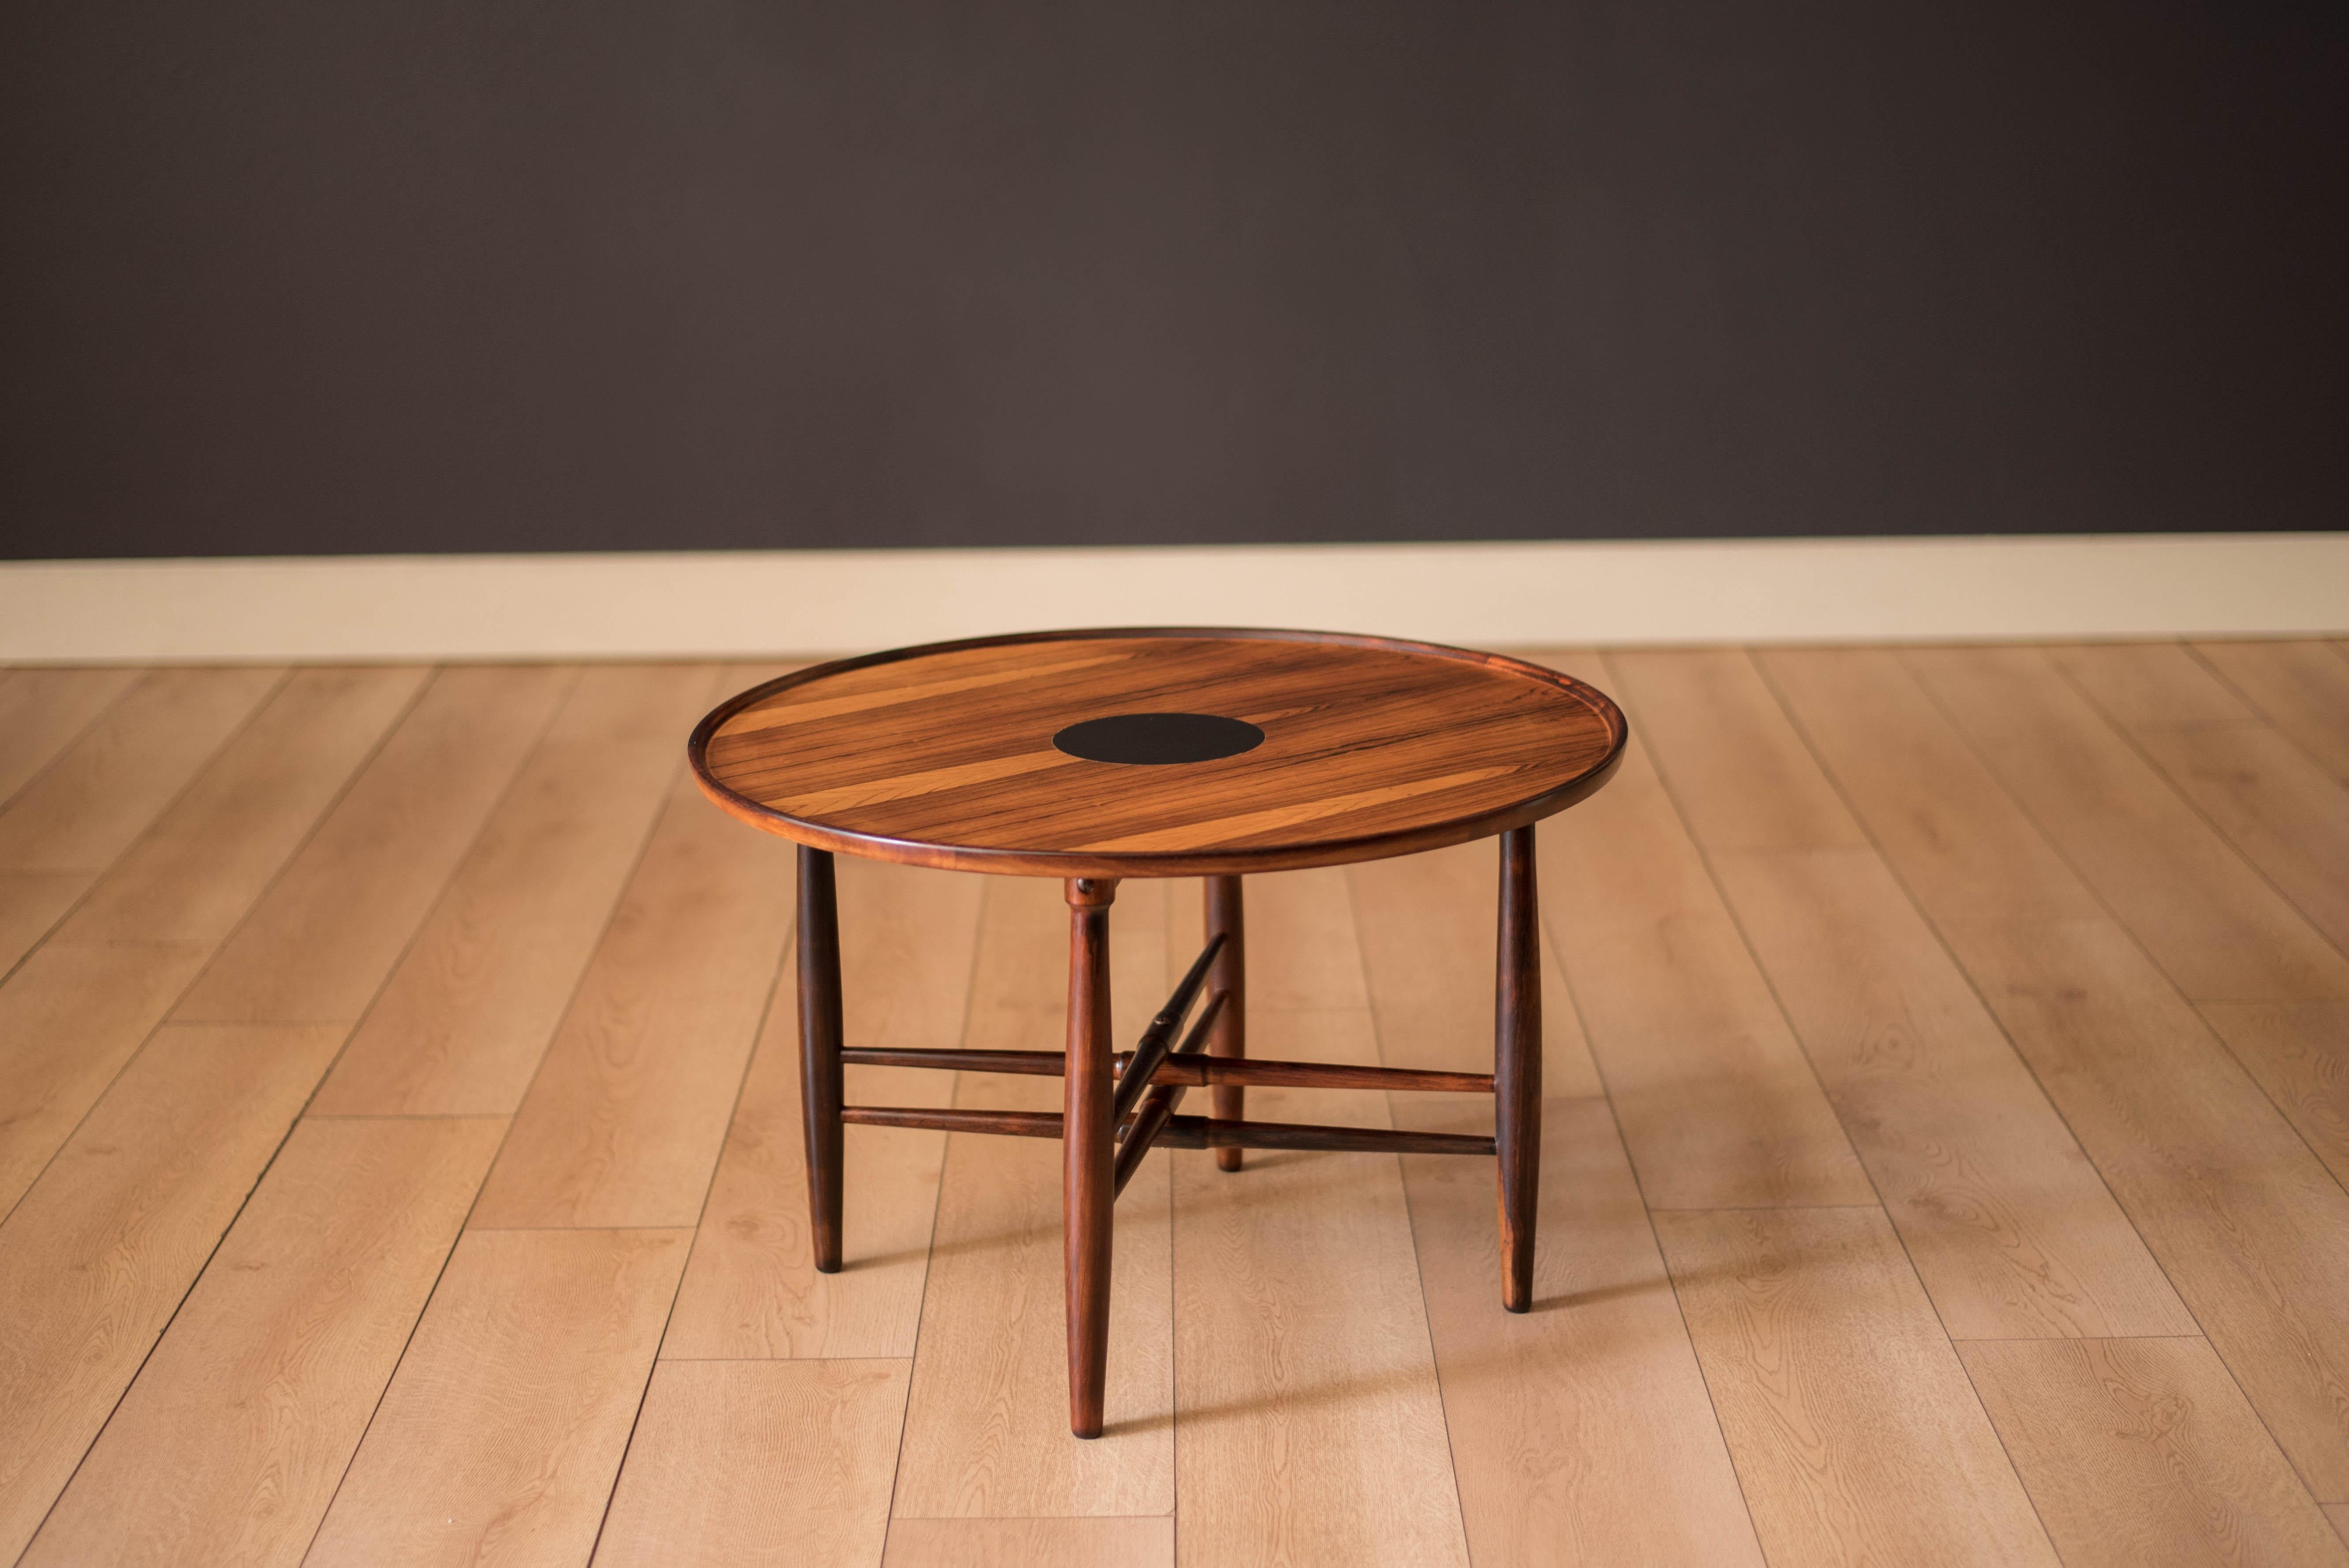 Mid-Century Modern round end table in rosewood designed by Poul Hundevad for Vamdrup Stolefabrik, Denmark. This occasional table features stunning rosewood grains and a unique black laminate insert convenient for resting drinks on. Supported by